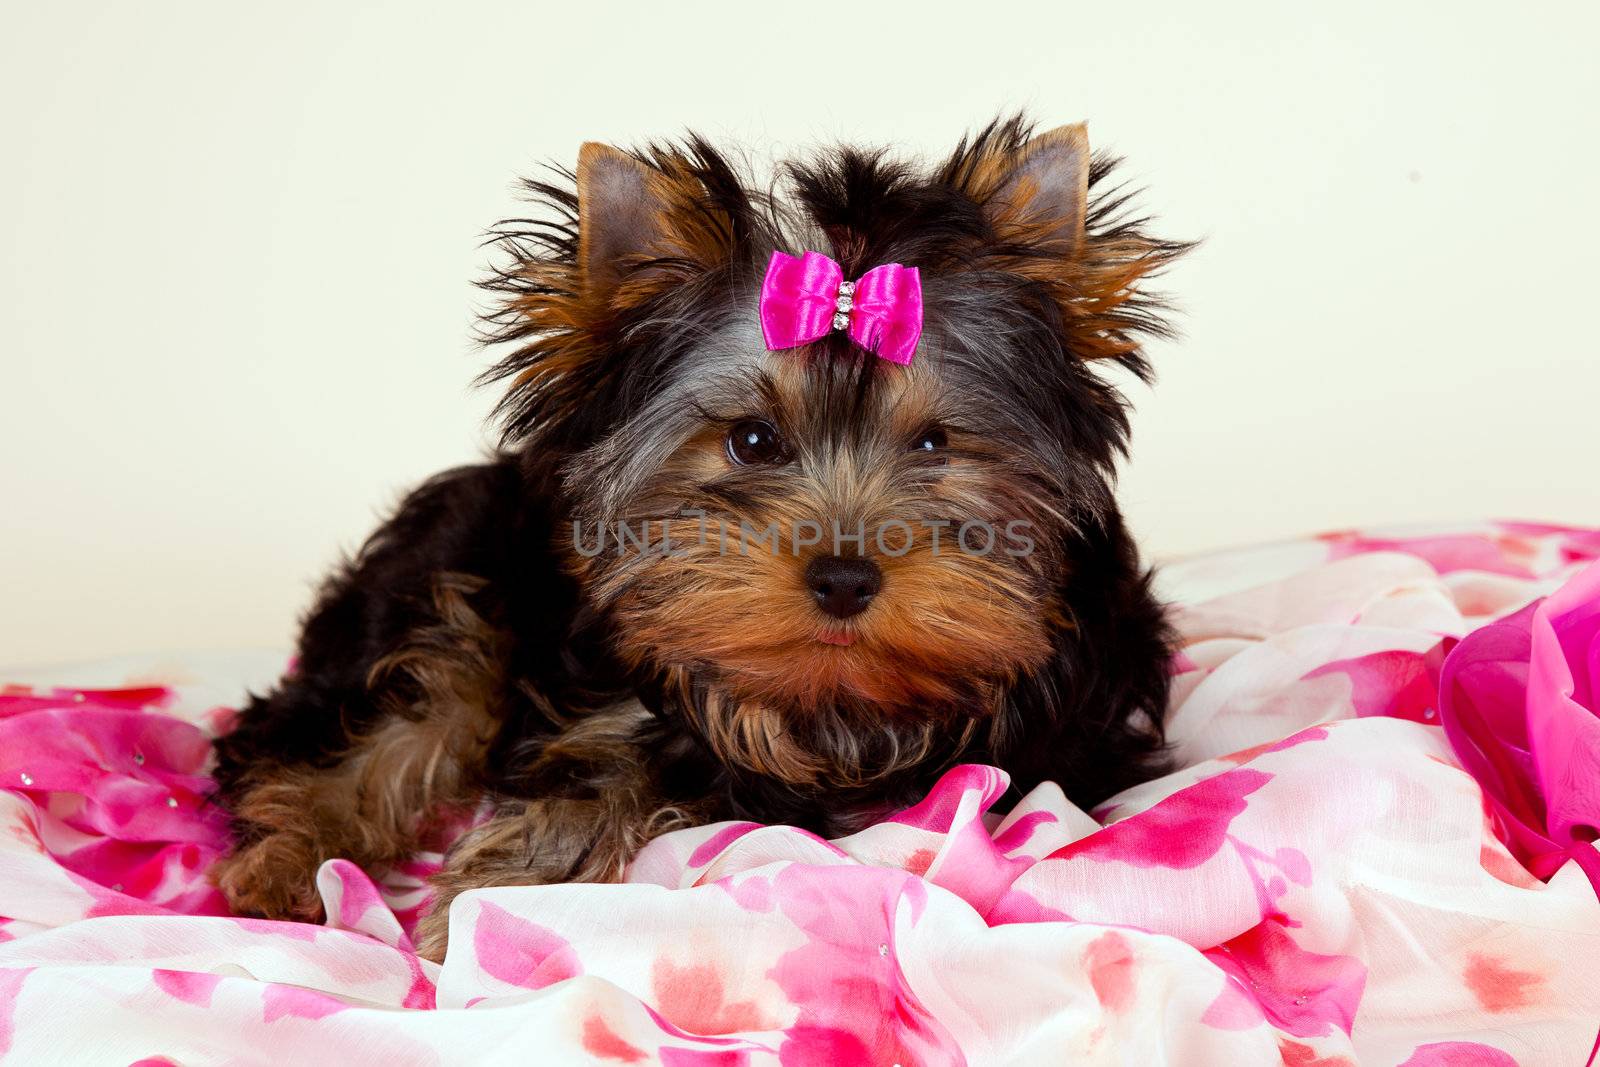 Yorkie puppy on light background by mdmmikle